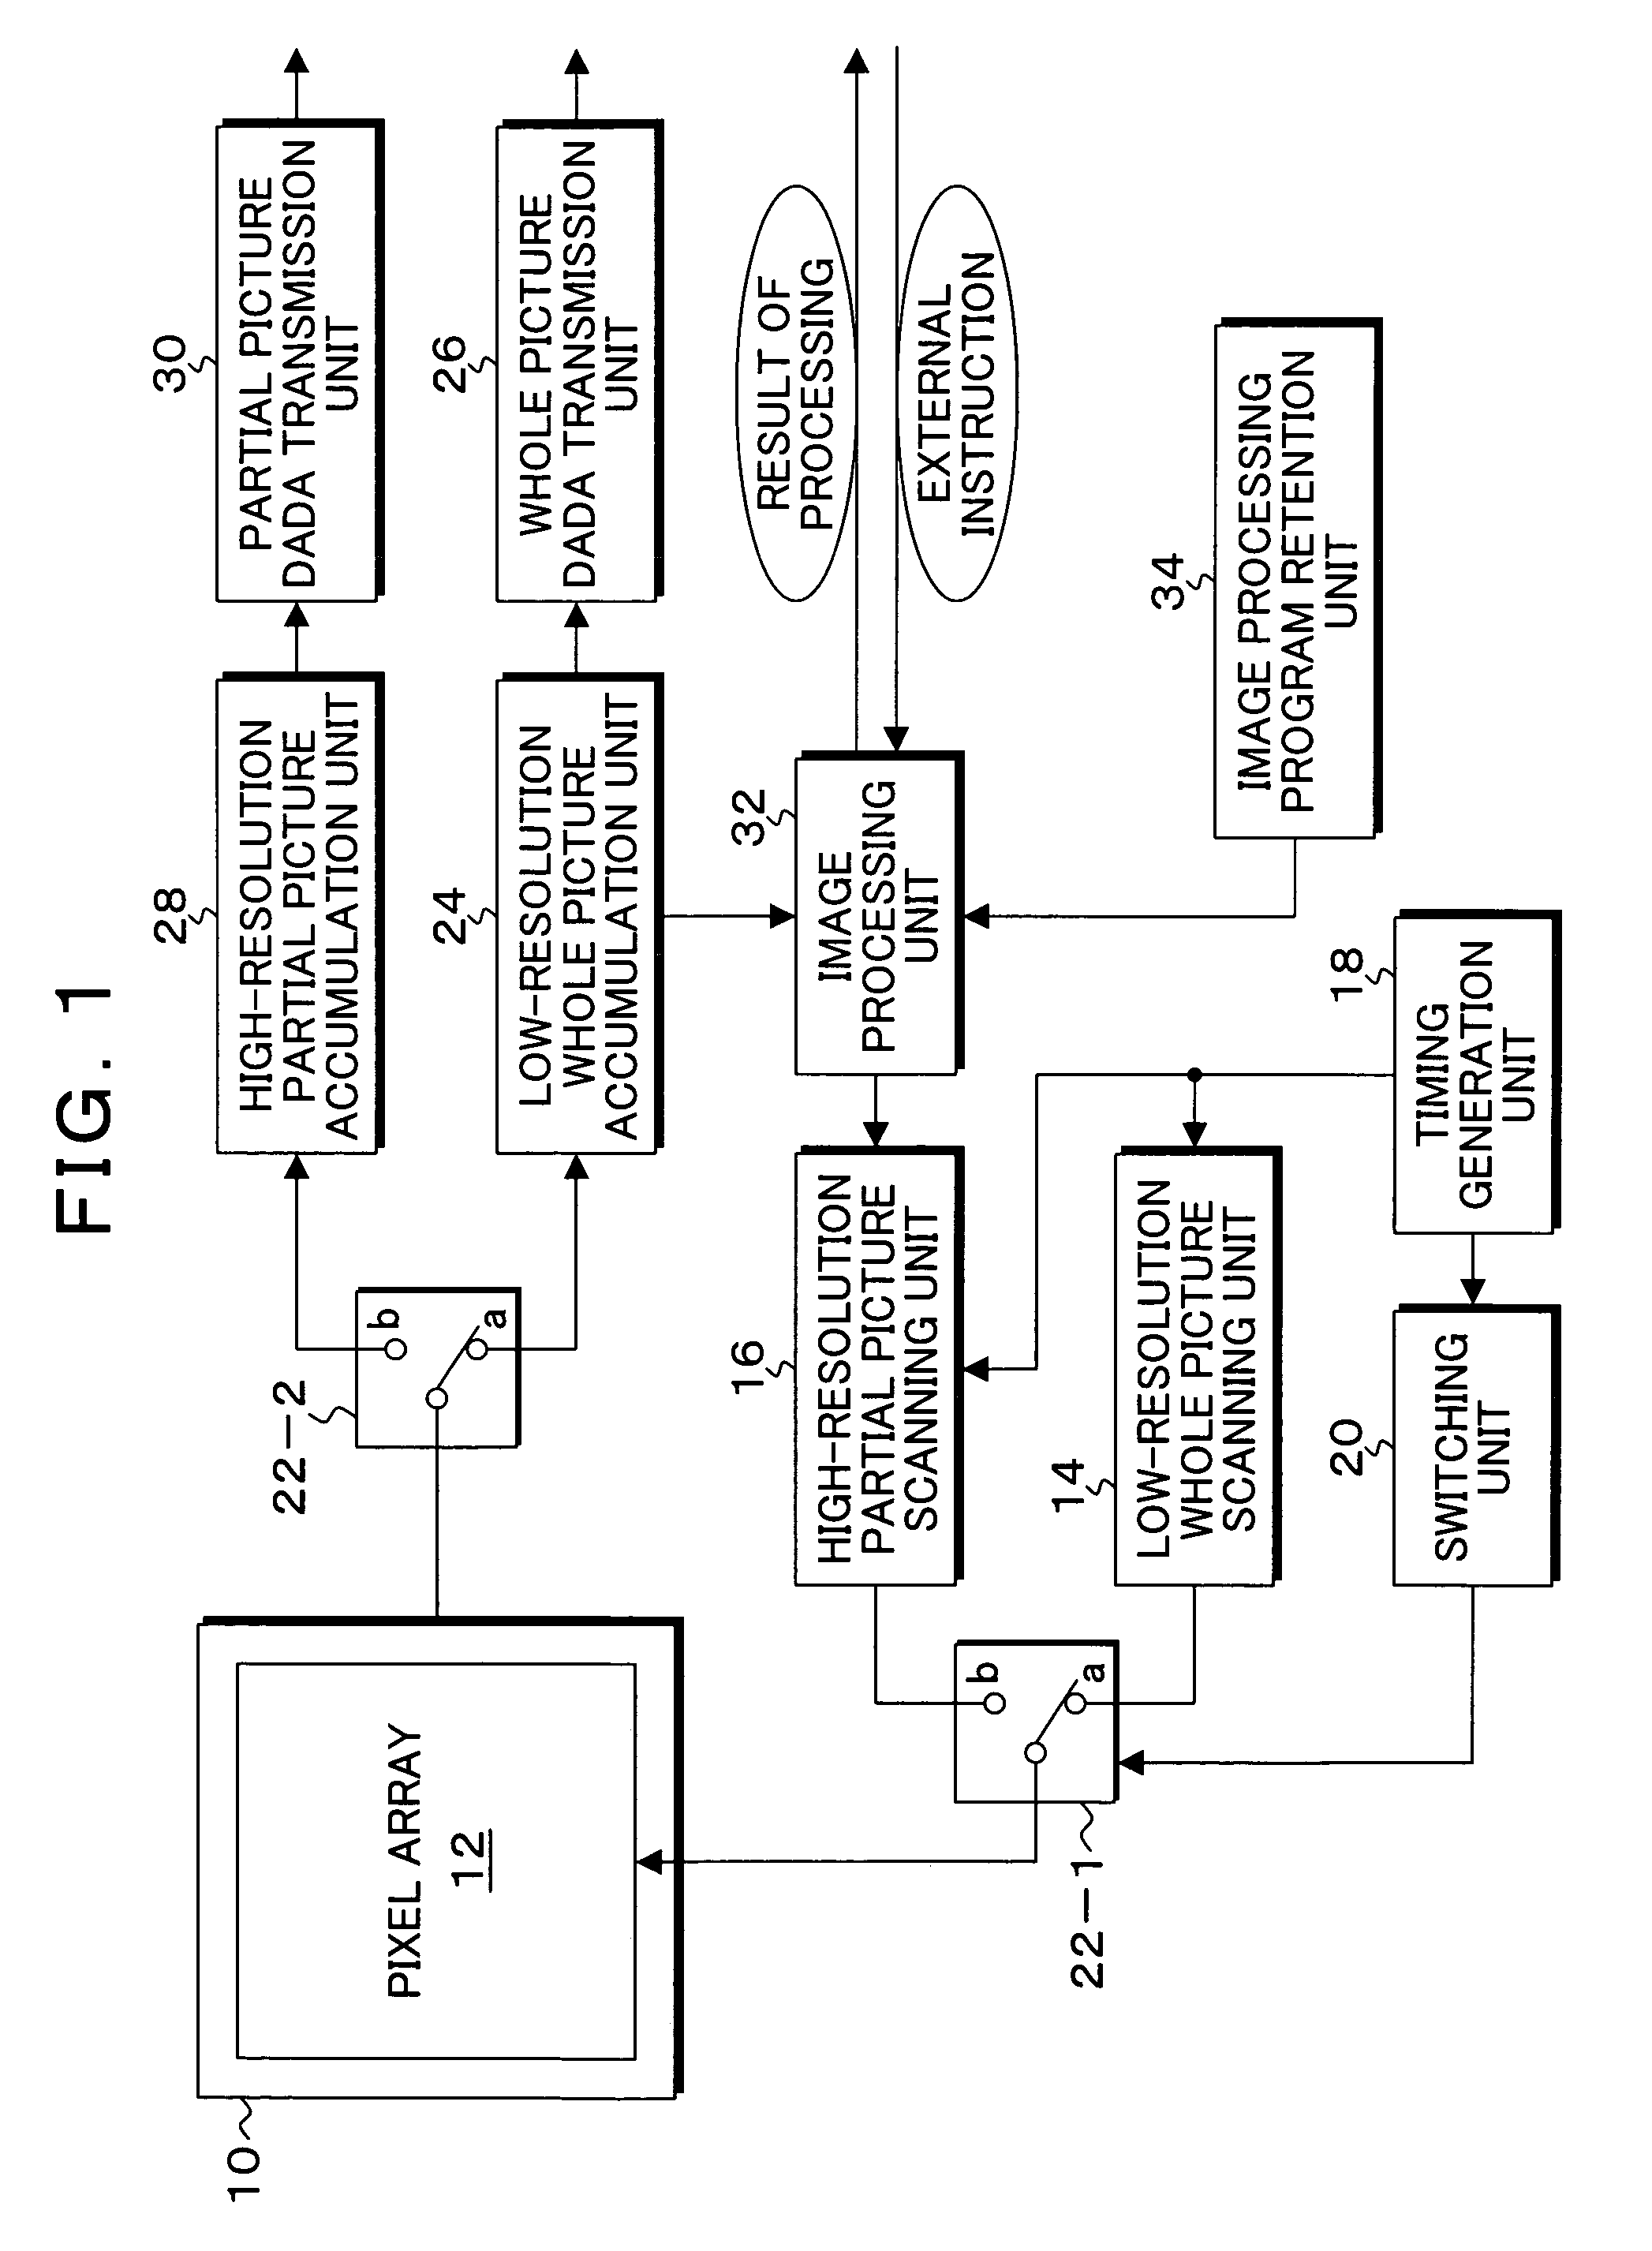 Picture inputting apparatus using high-resolution image pickup device to acquire low-resolution whole pictures and high-resolution partial pictures